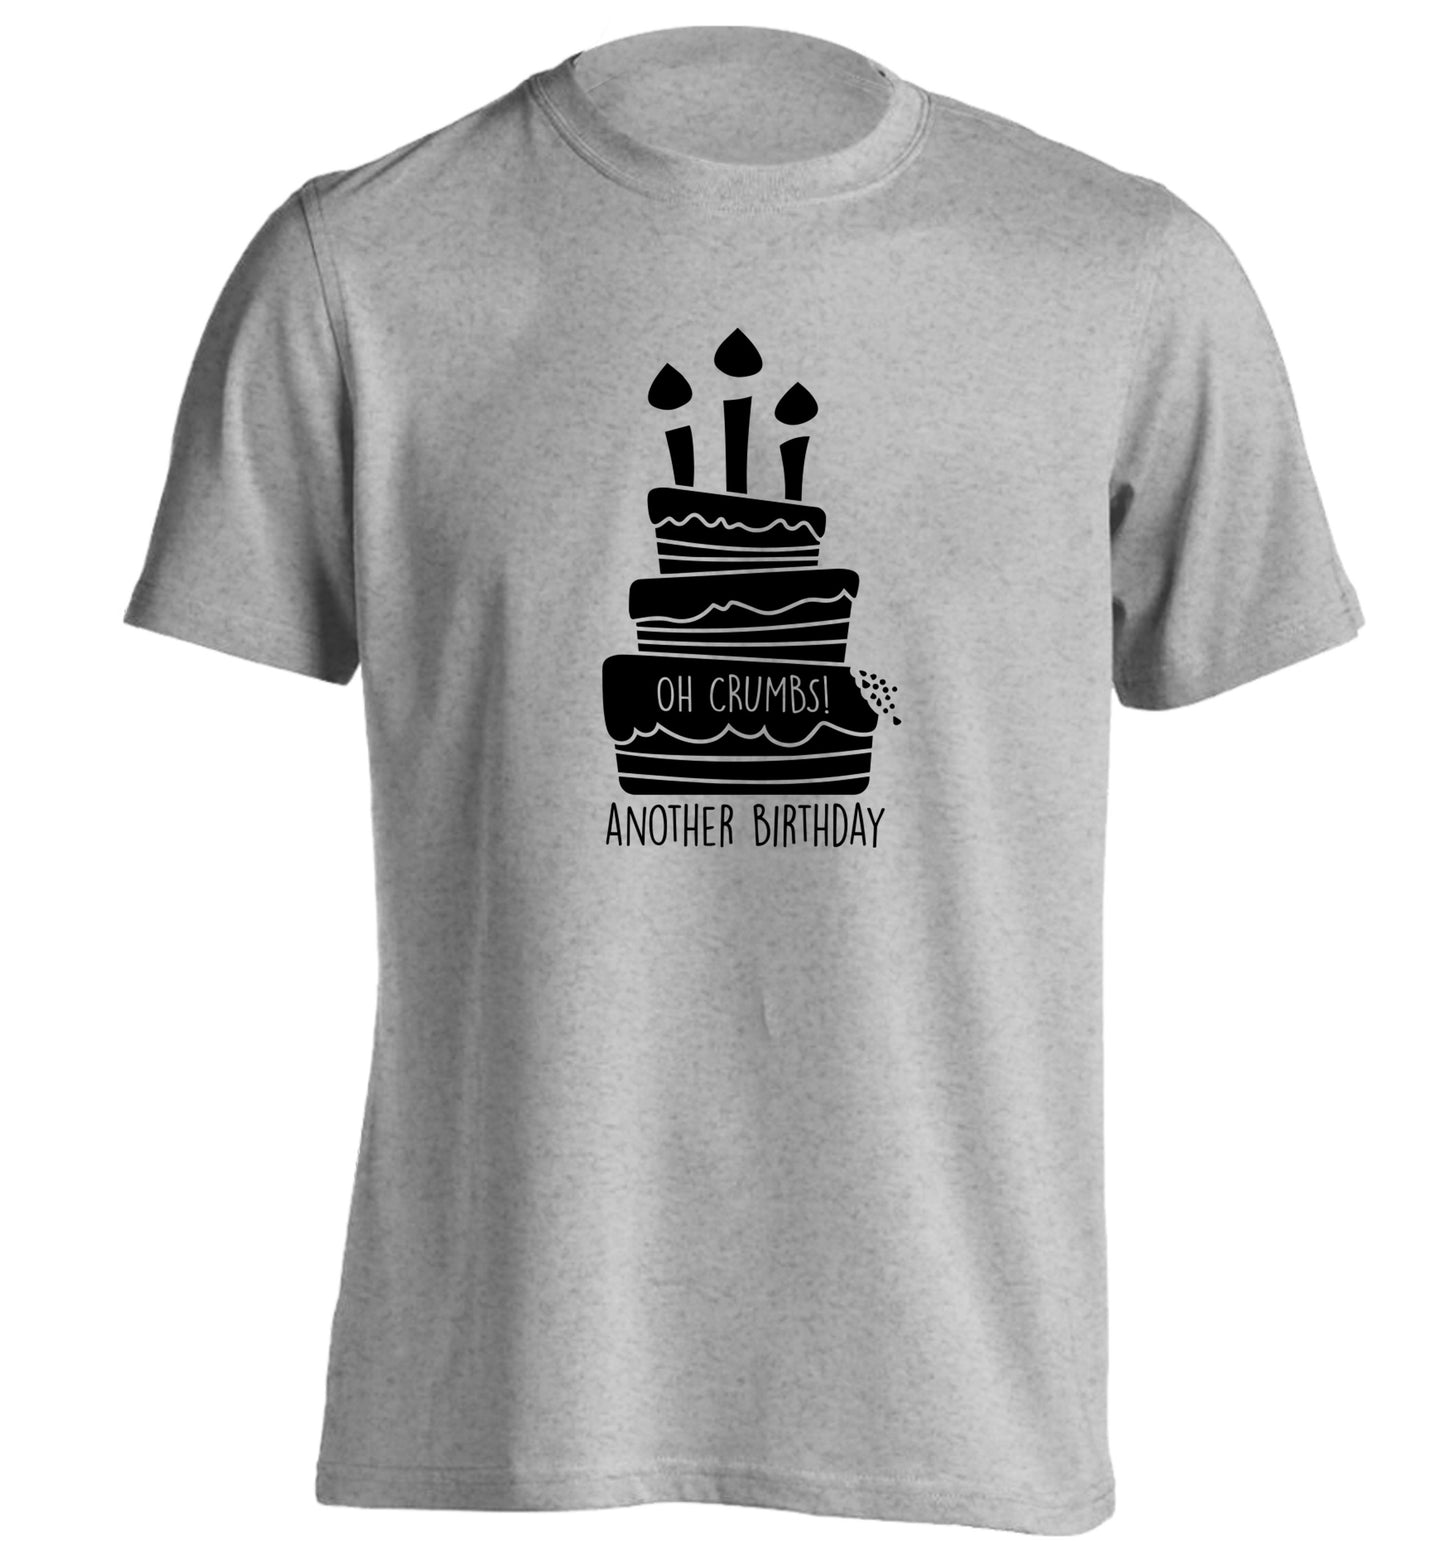 Oh crumbs another birthday! adults unisex grey Tshirt 2XL